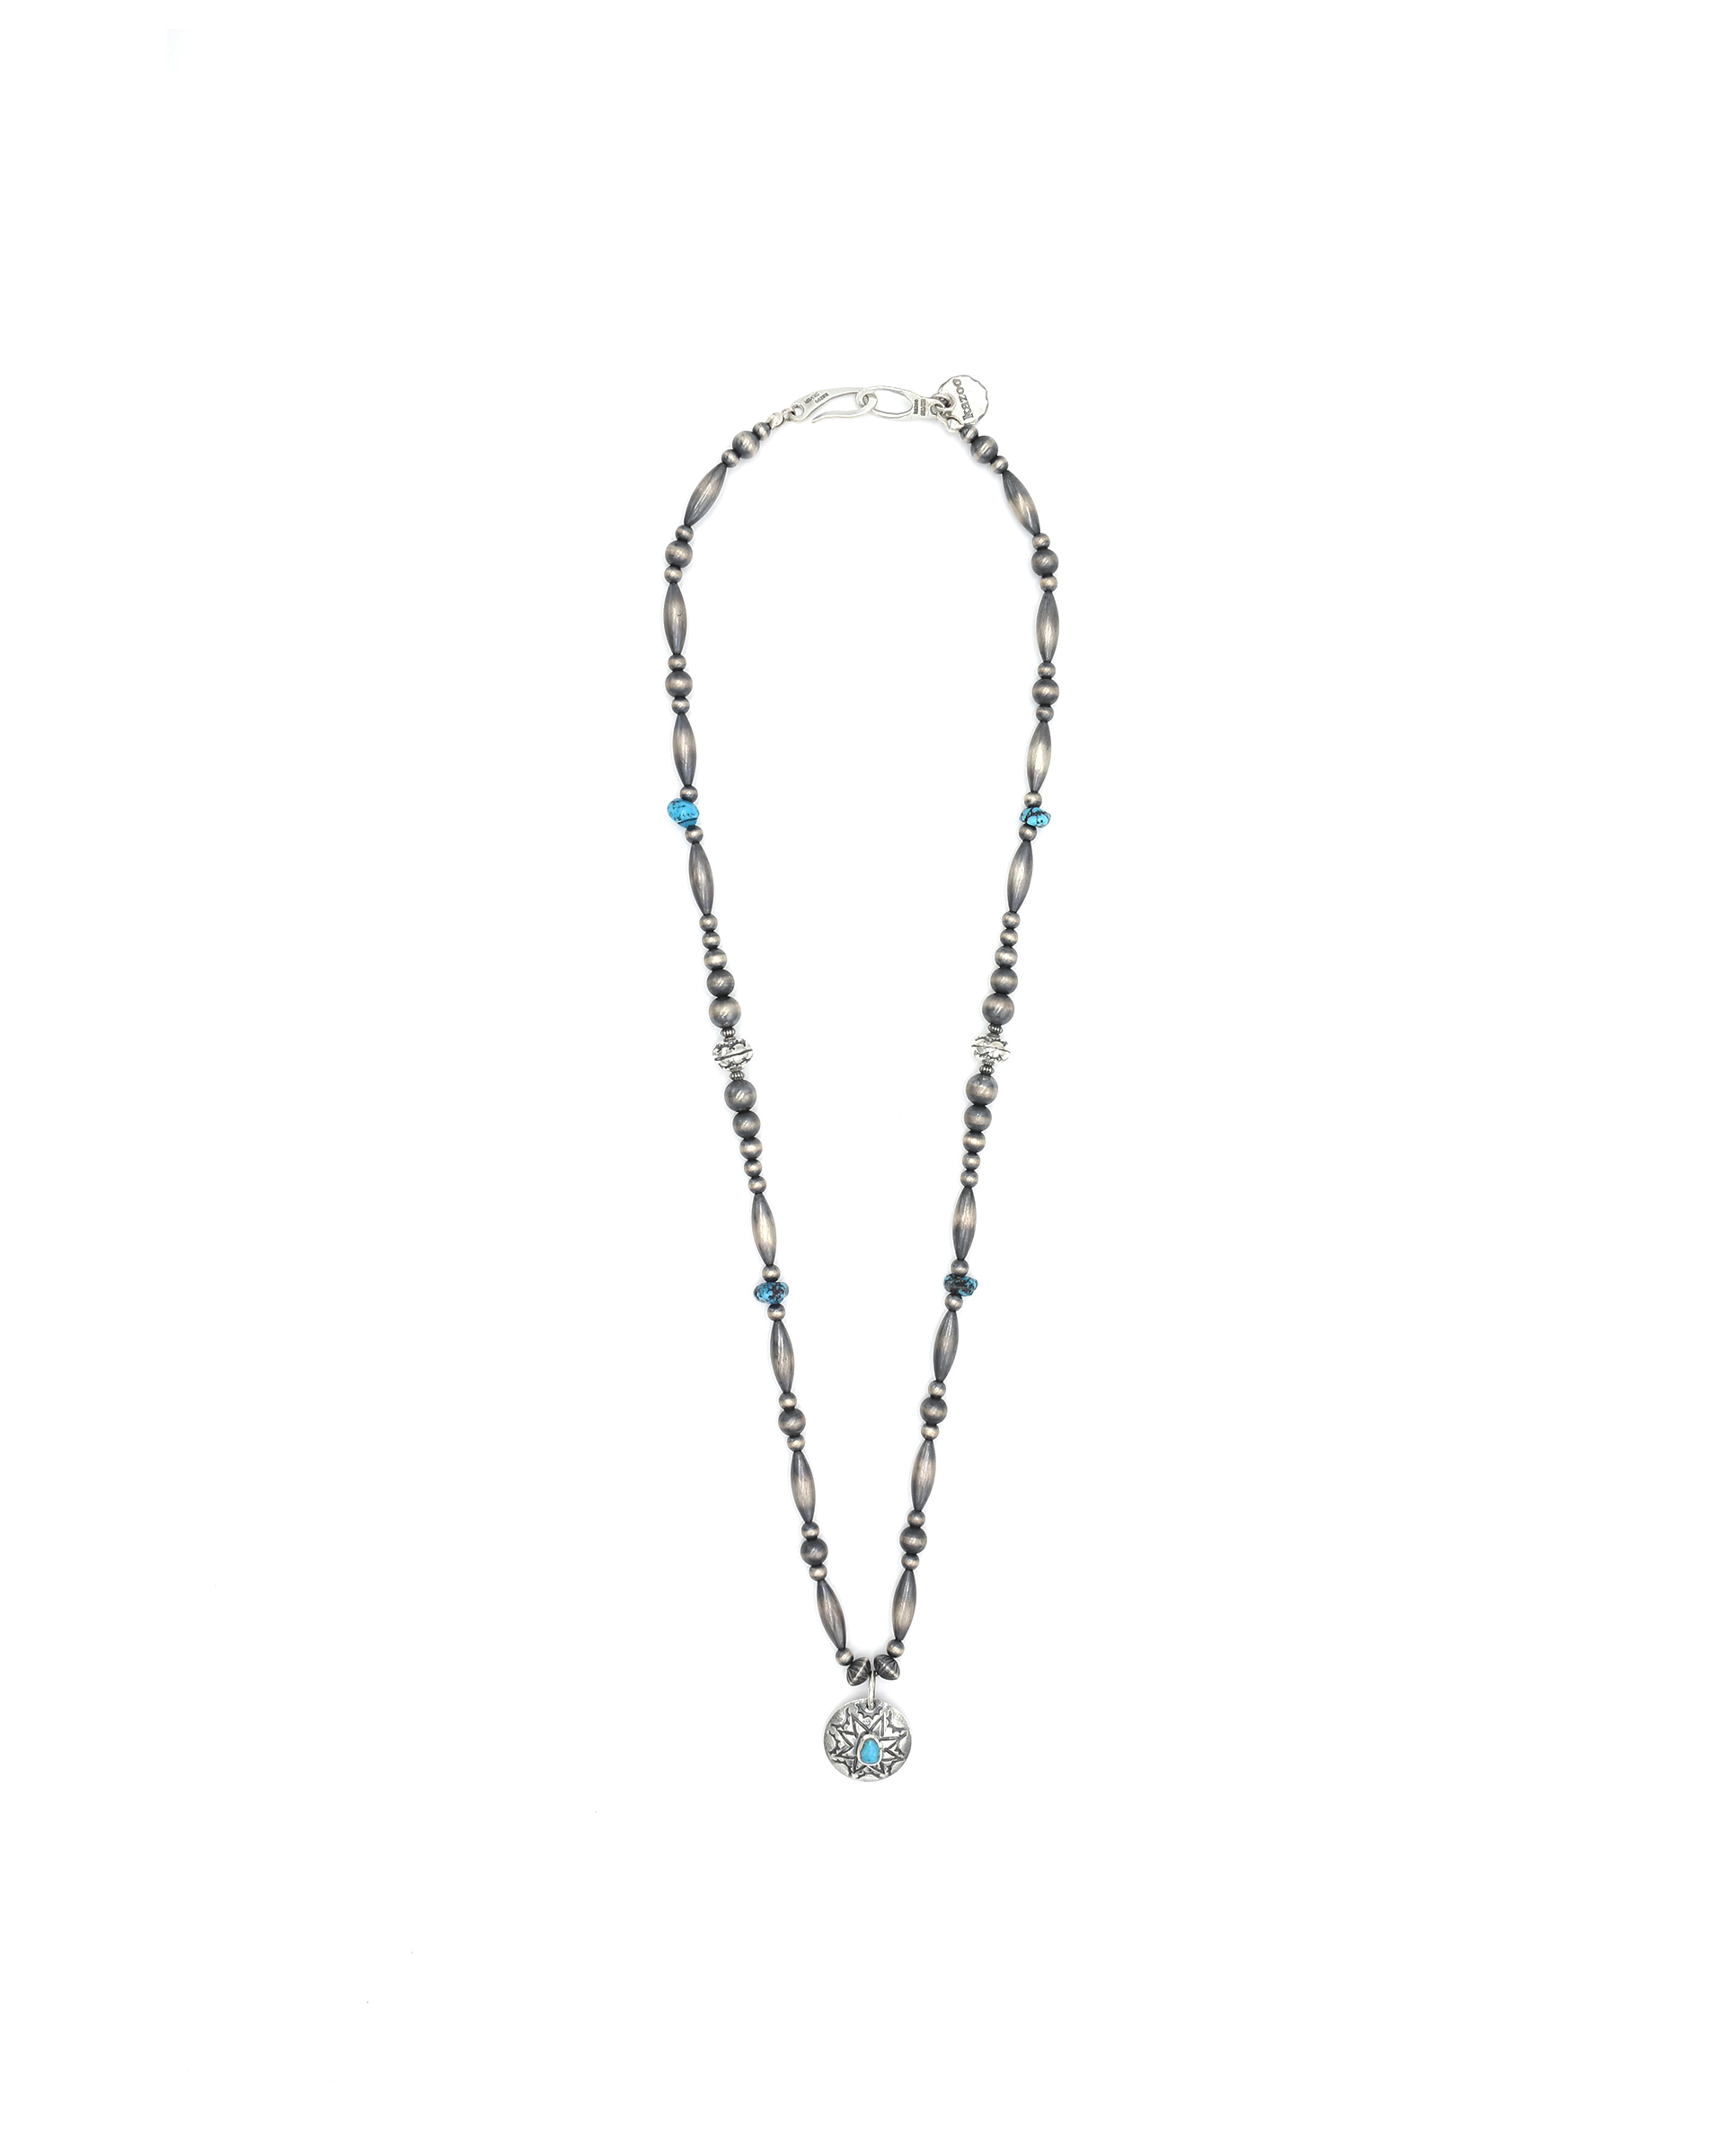 SILVER BEADS NECKLACE - RUGGED ROAD